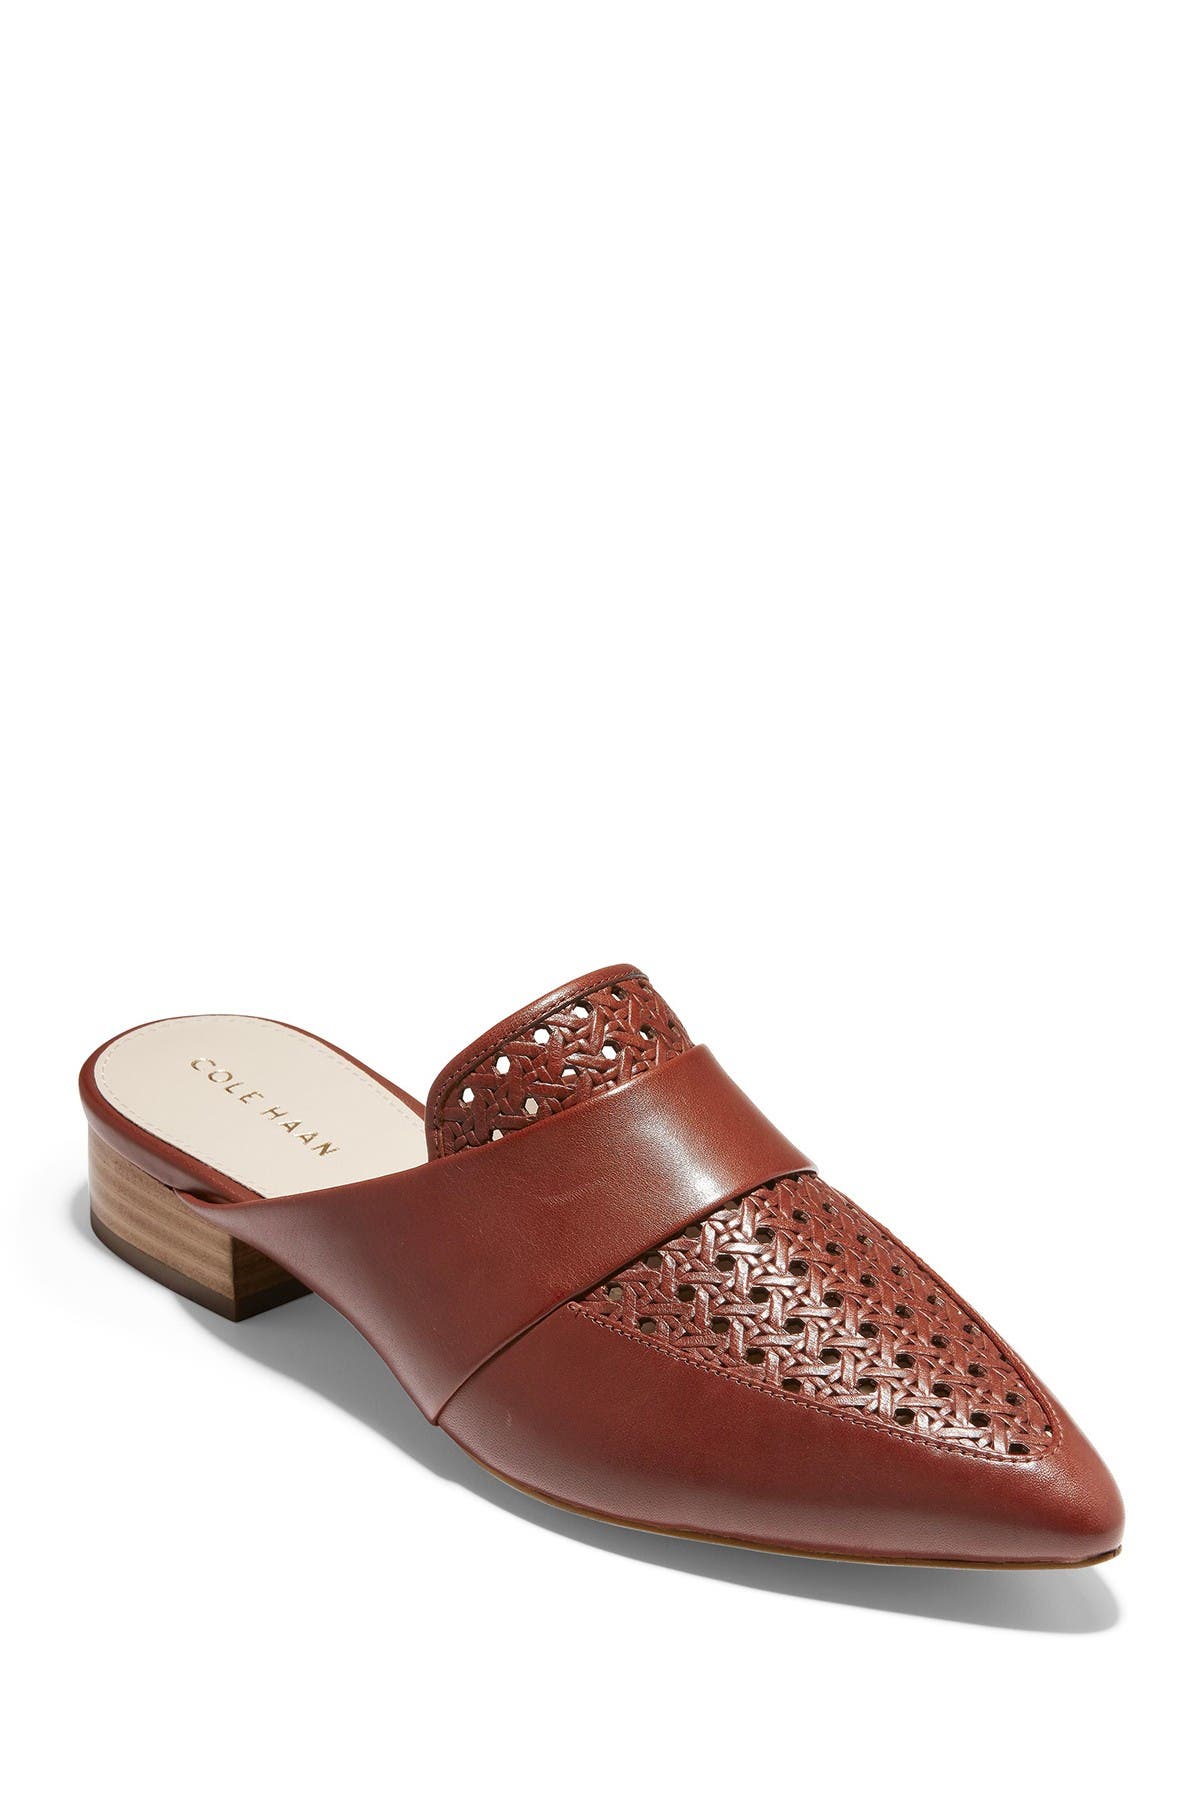 nordstrom shoes mules